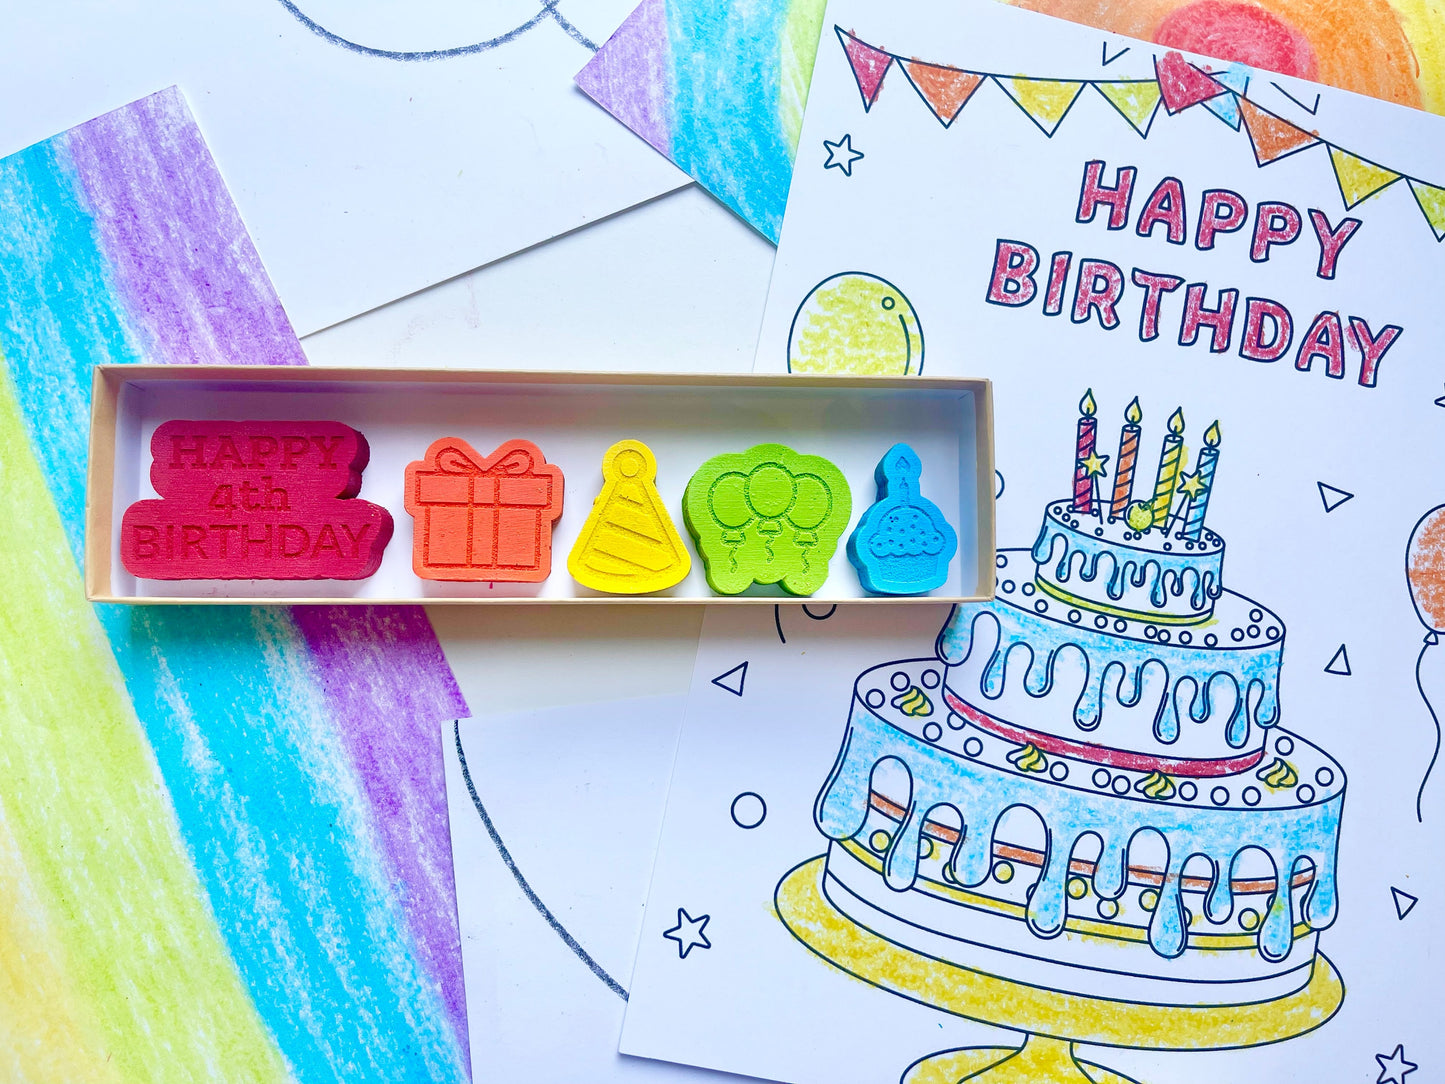 4th Birthday Crayons - 4th Birthday Gifts - Kids Happy Birthday Gifts - Kids Birthday Presents - Gifts For Kids - 4th Birthday Party Favors